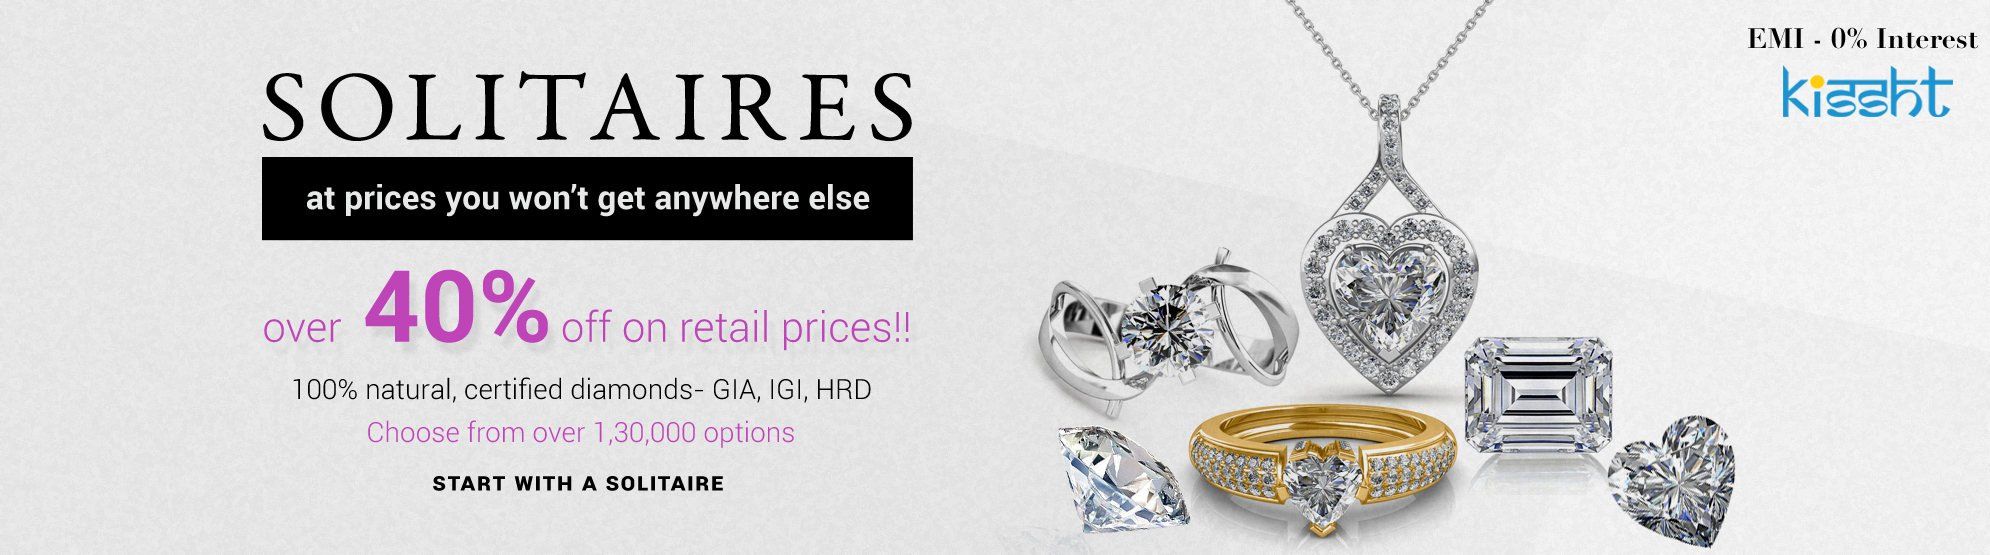 Solitaire Diamonds - Buy at Best Prices 